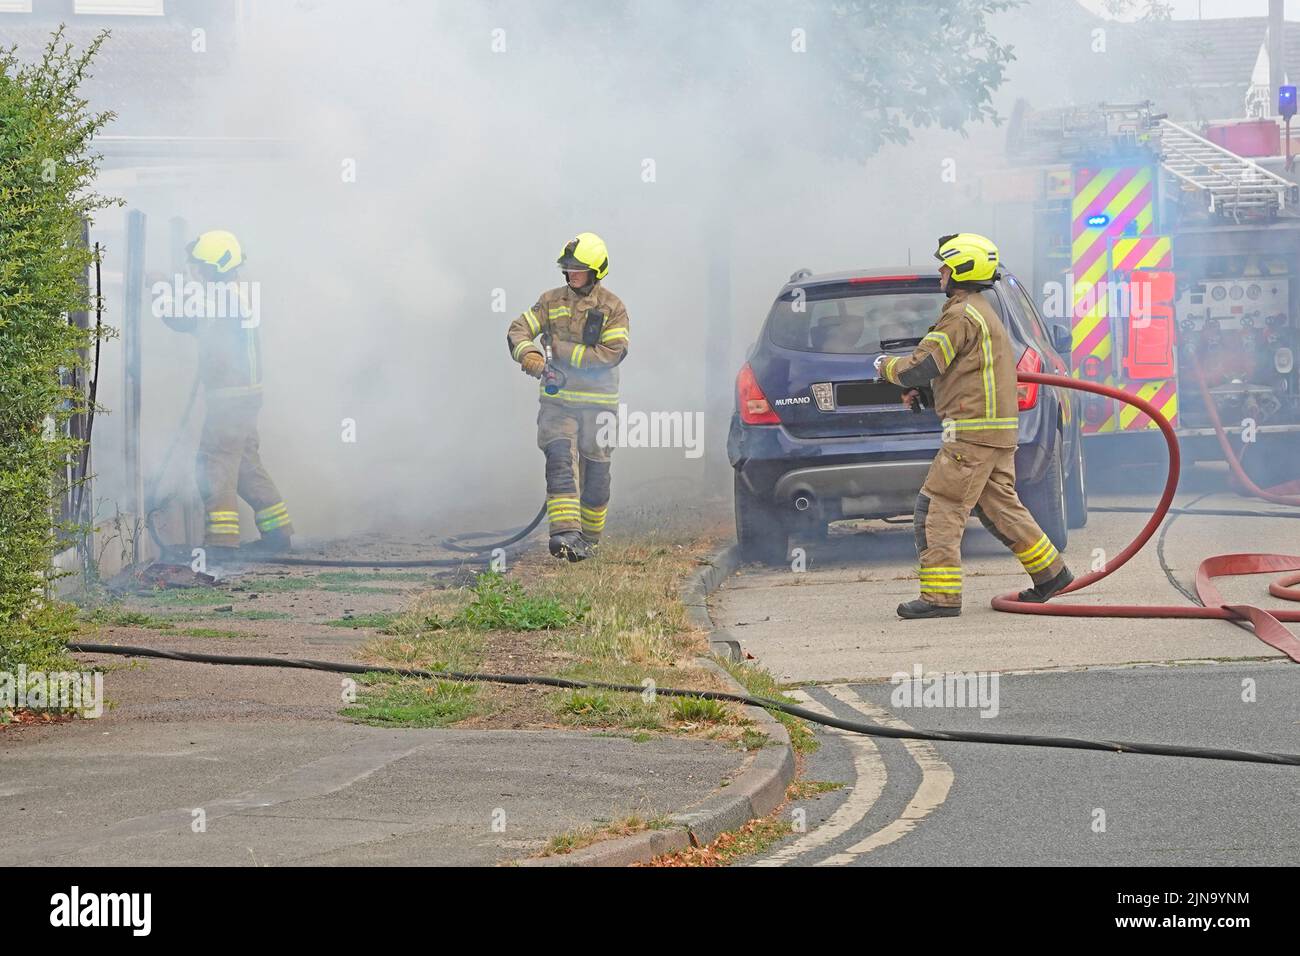 Essex Fire and Rescue Service firefighter in protective clothing dangerous & hazardous work on house fire working with water hoses England UK Stock Photo